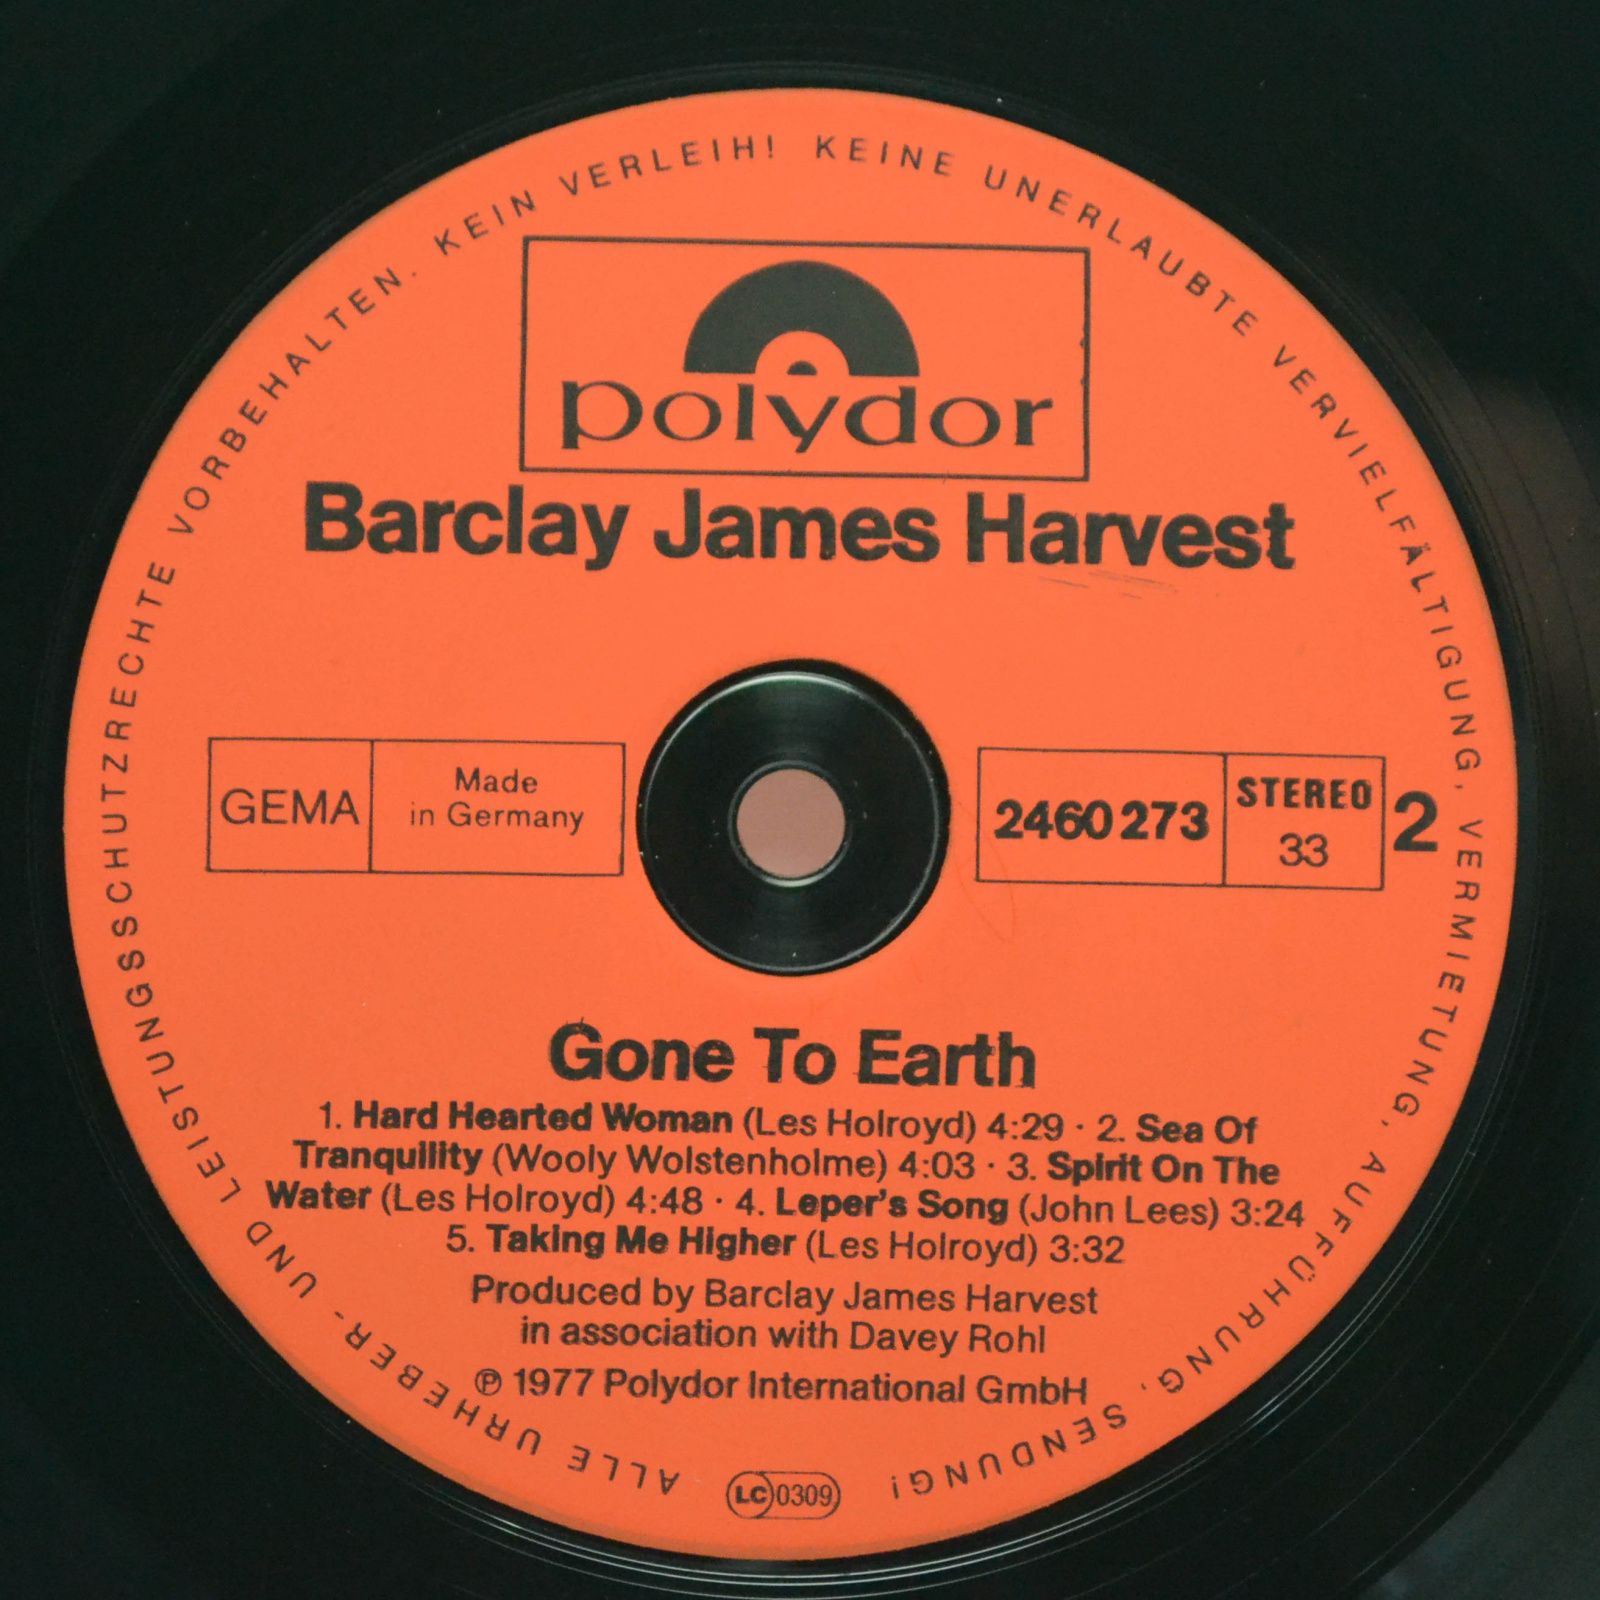 Barclay James Harvest — Gone To Earth, 1977